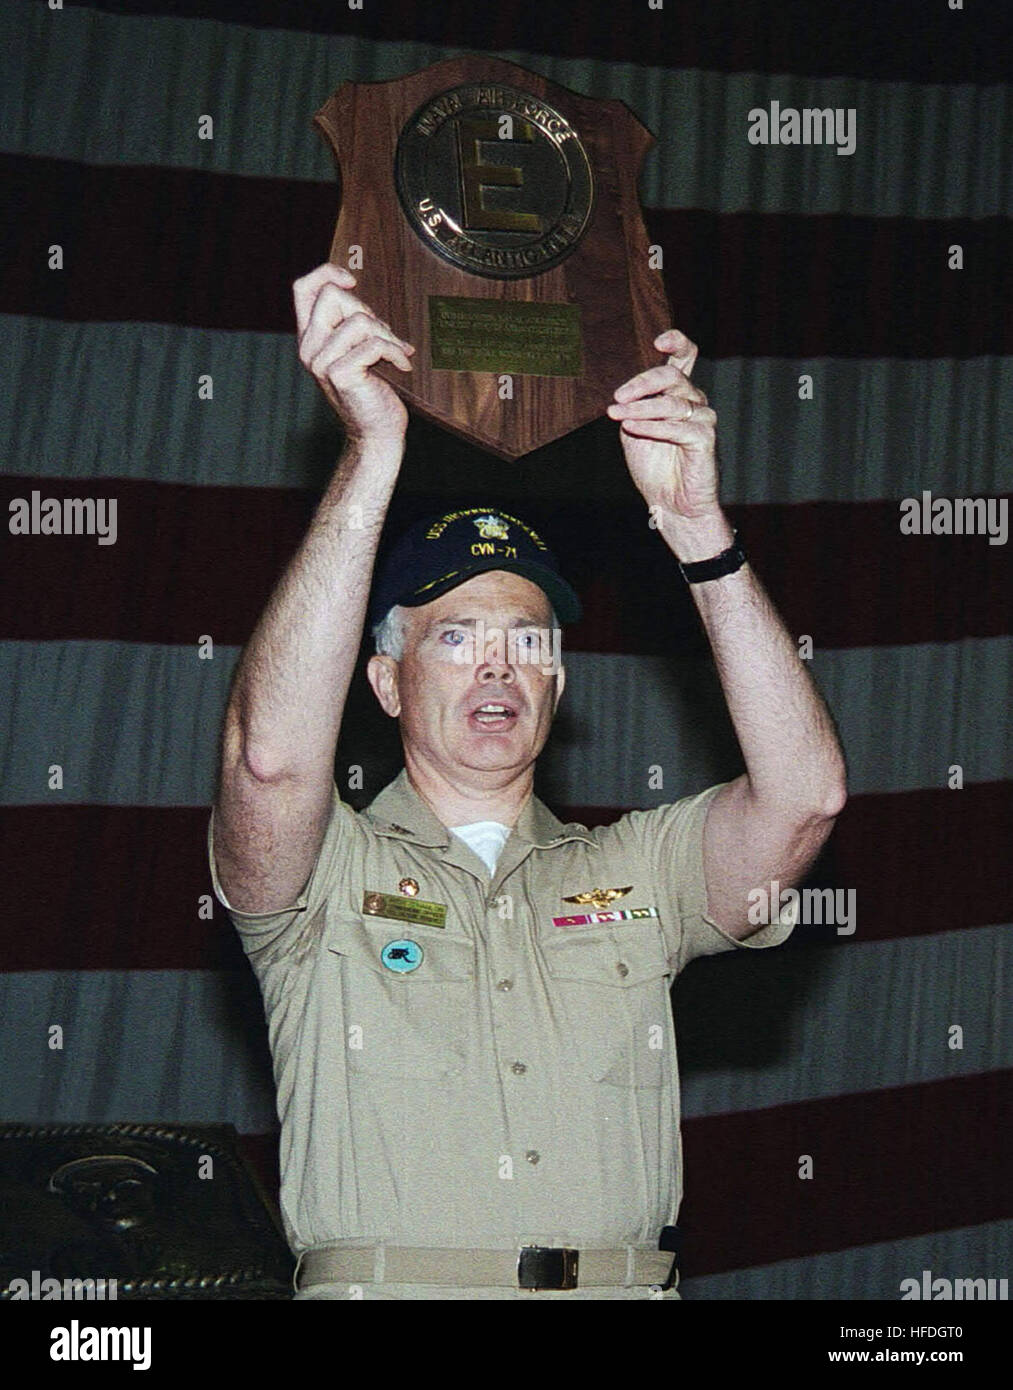 020502-N-5786V-001 Aboard USS Theodore Roosevelt (CVN 71) May 2, 2002 -- Capt. Richard O'Hanlon, Commanding Officer, USS Theodore Roosevelt, proudly displays the Battle Efficiency (Battle 'E') award that was presented to the crew by Commander Naval Air Forces Atlantic Fleet, Rear Adm. Michael Malone.  Roosevelt recently completed a six-month deployment to the Mediterranean and North Arabian Sea conducting combat missions in support of Operation Enduring Freedom.  U.S. Navy photo by PhotographerÕs Mate 3rd Class Angela Virnig.  (RELEASED) US Navy 020502-N-5786V-001 Capt Richard O'Hanlon Stock Photo